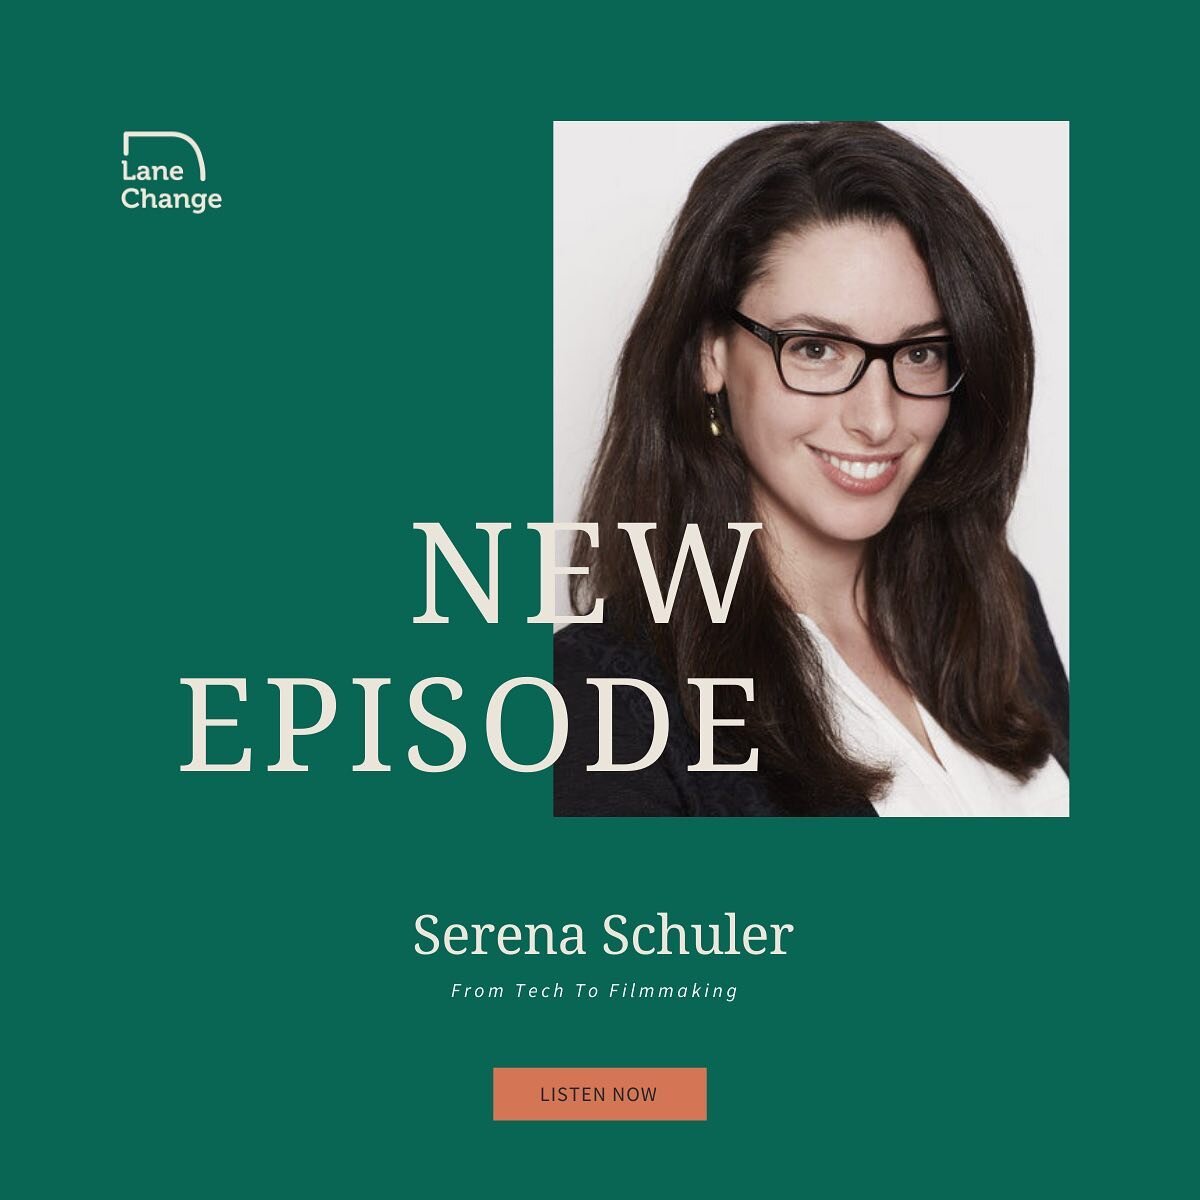 Inspiring conversation with @serena_schuler on her journey going from tech to film with @lanechangepod. Hope this encourages people to make their own lane change!  #womenintech #womeninfilm #femaledirector #careerchange #ladyboss #makeithappen #makes